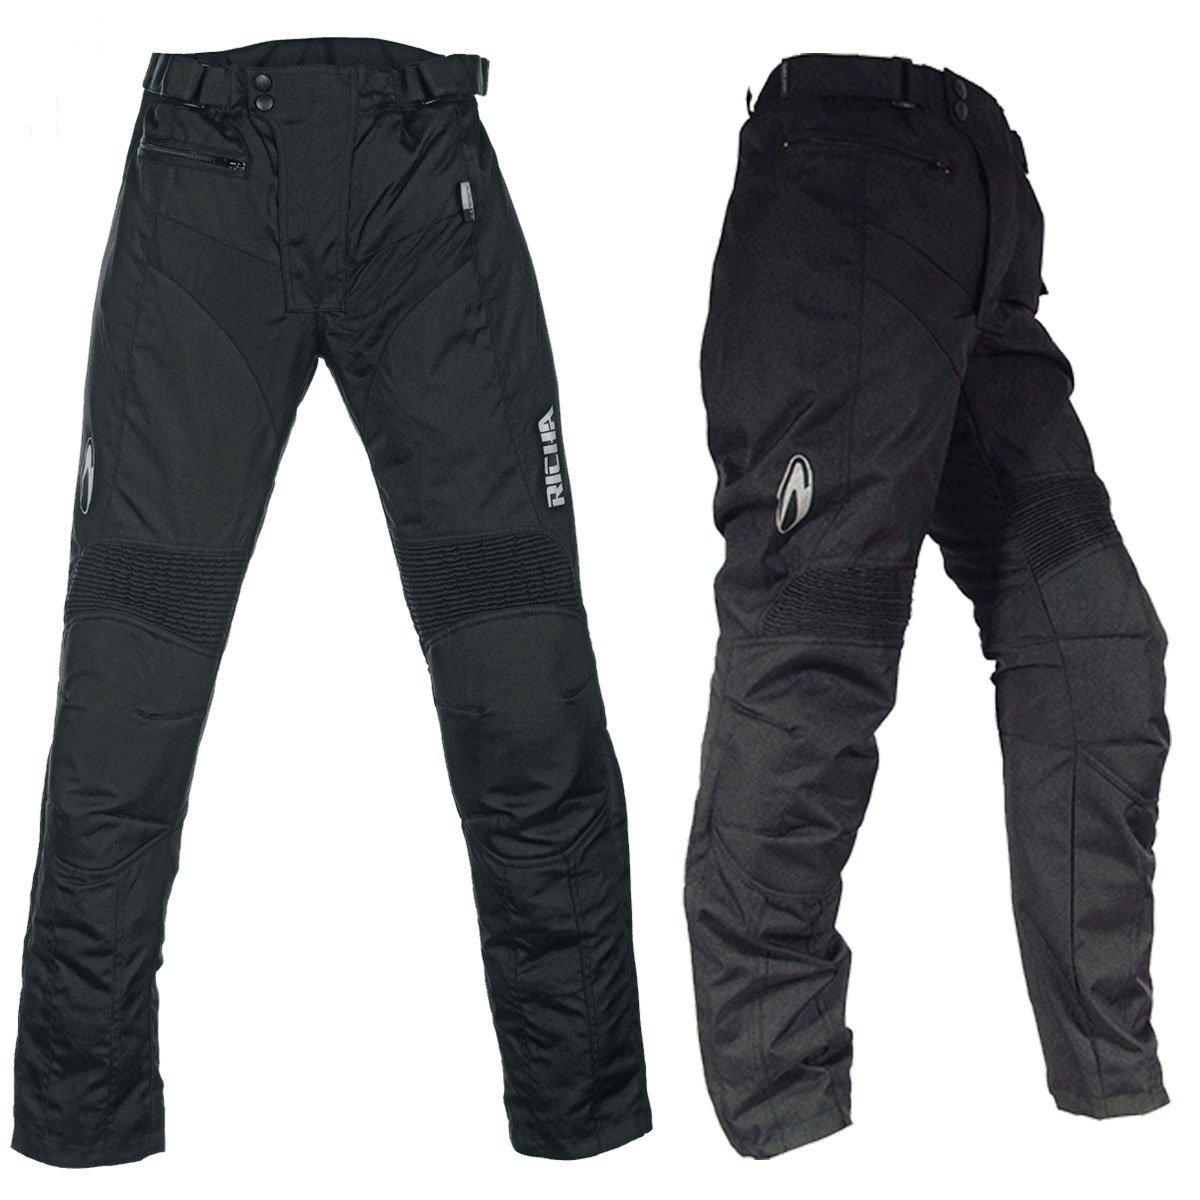 Richa Everest Waterproof Motorcycle Textile Trousers with a short leg length